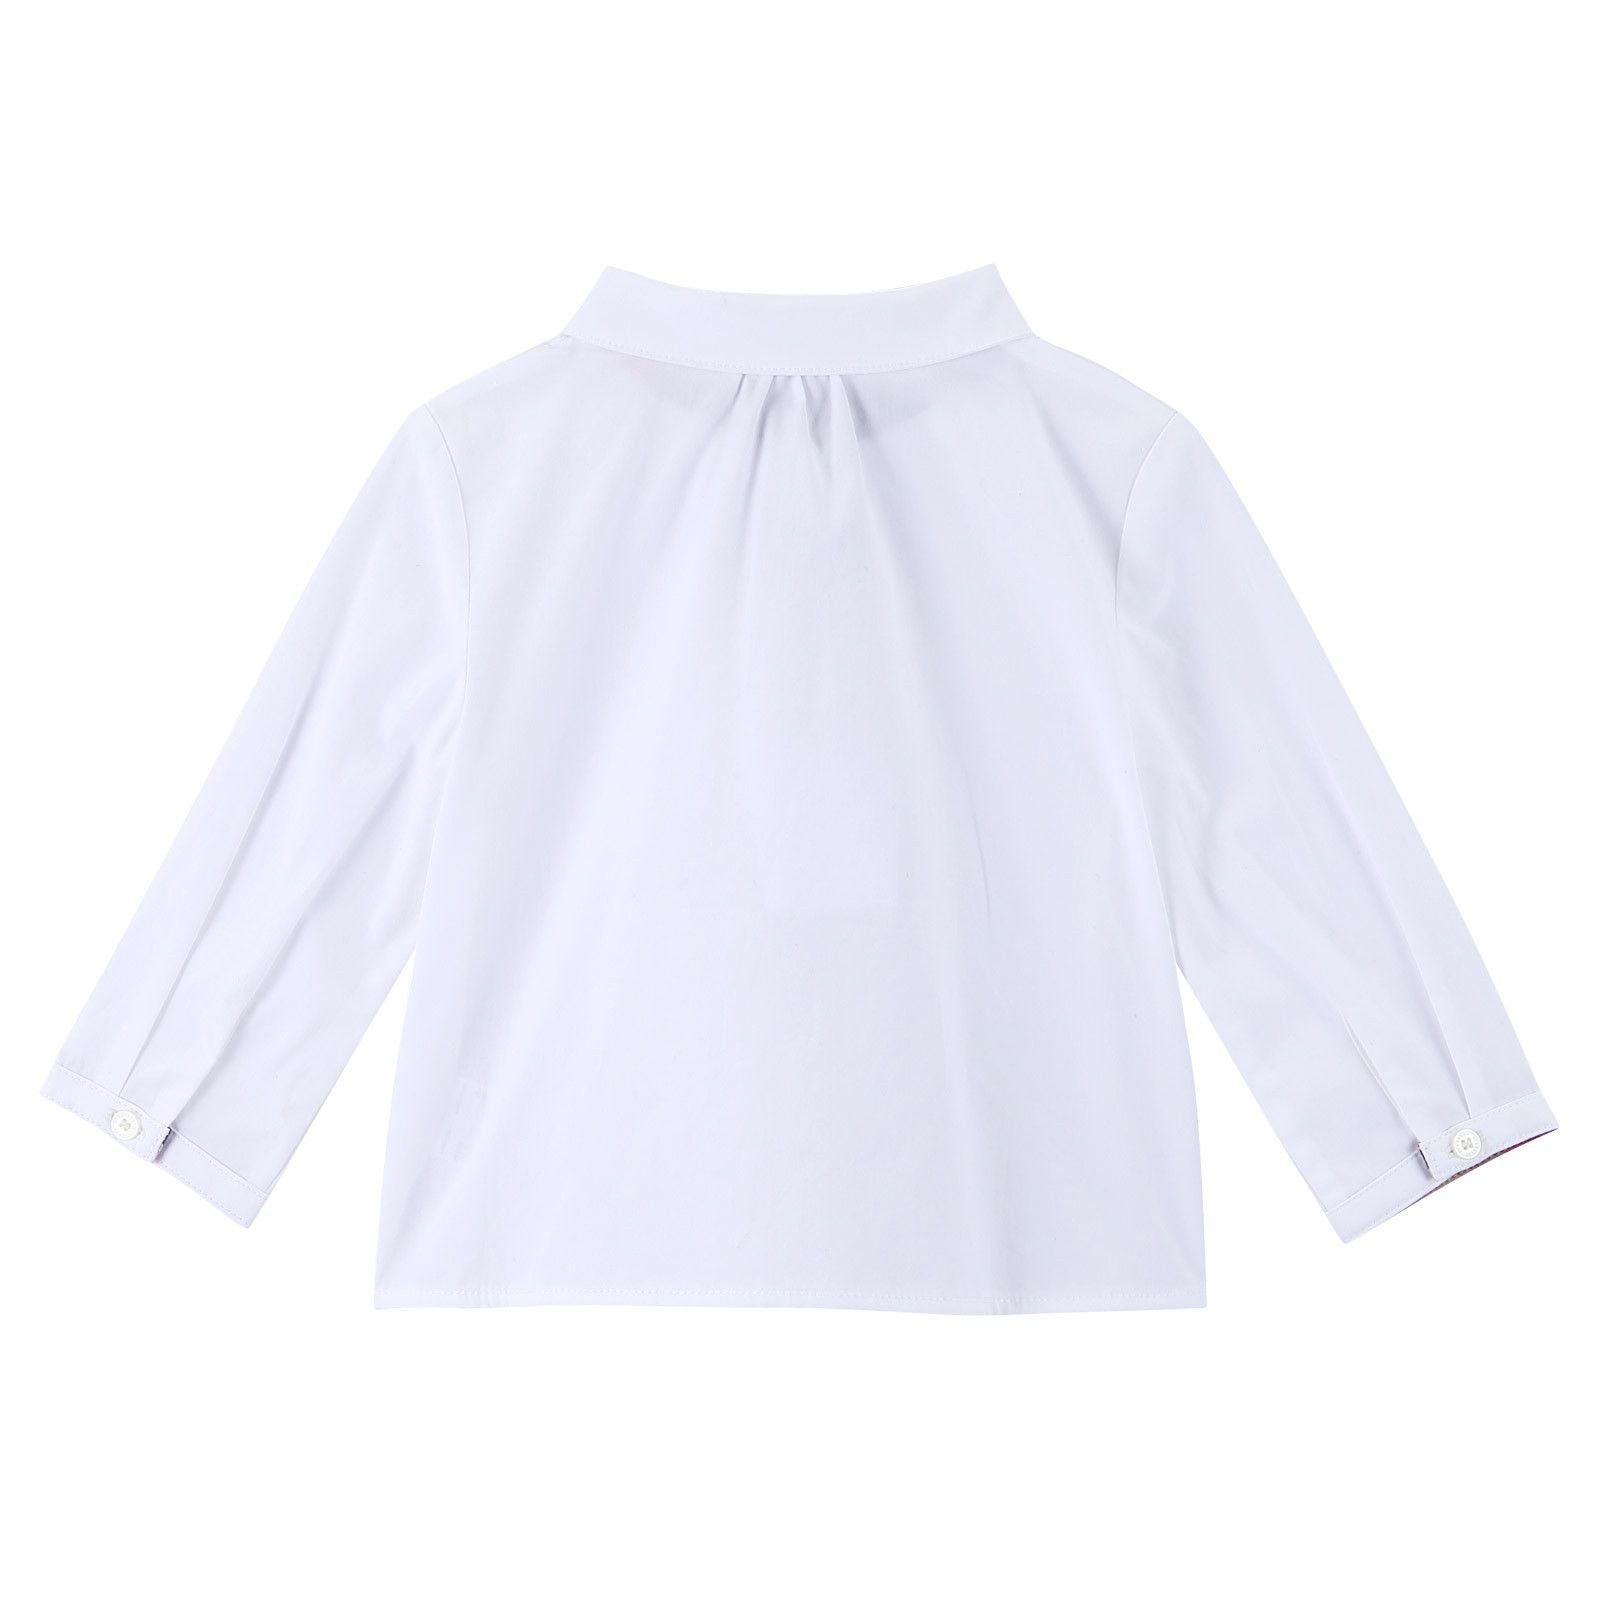 Baby Girls White Cotton Shirts With Embroidered Trims - CÉMAROSE | Children's Fashion Store - 2